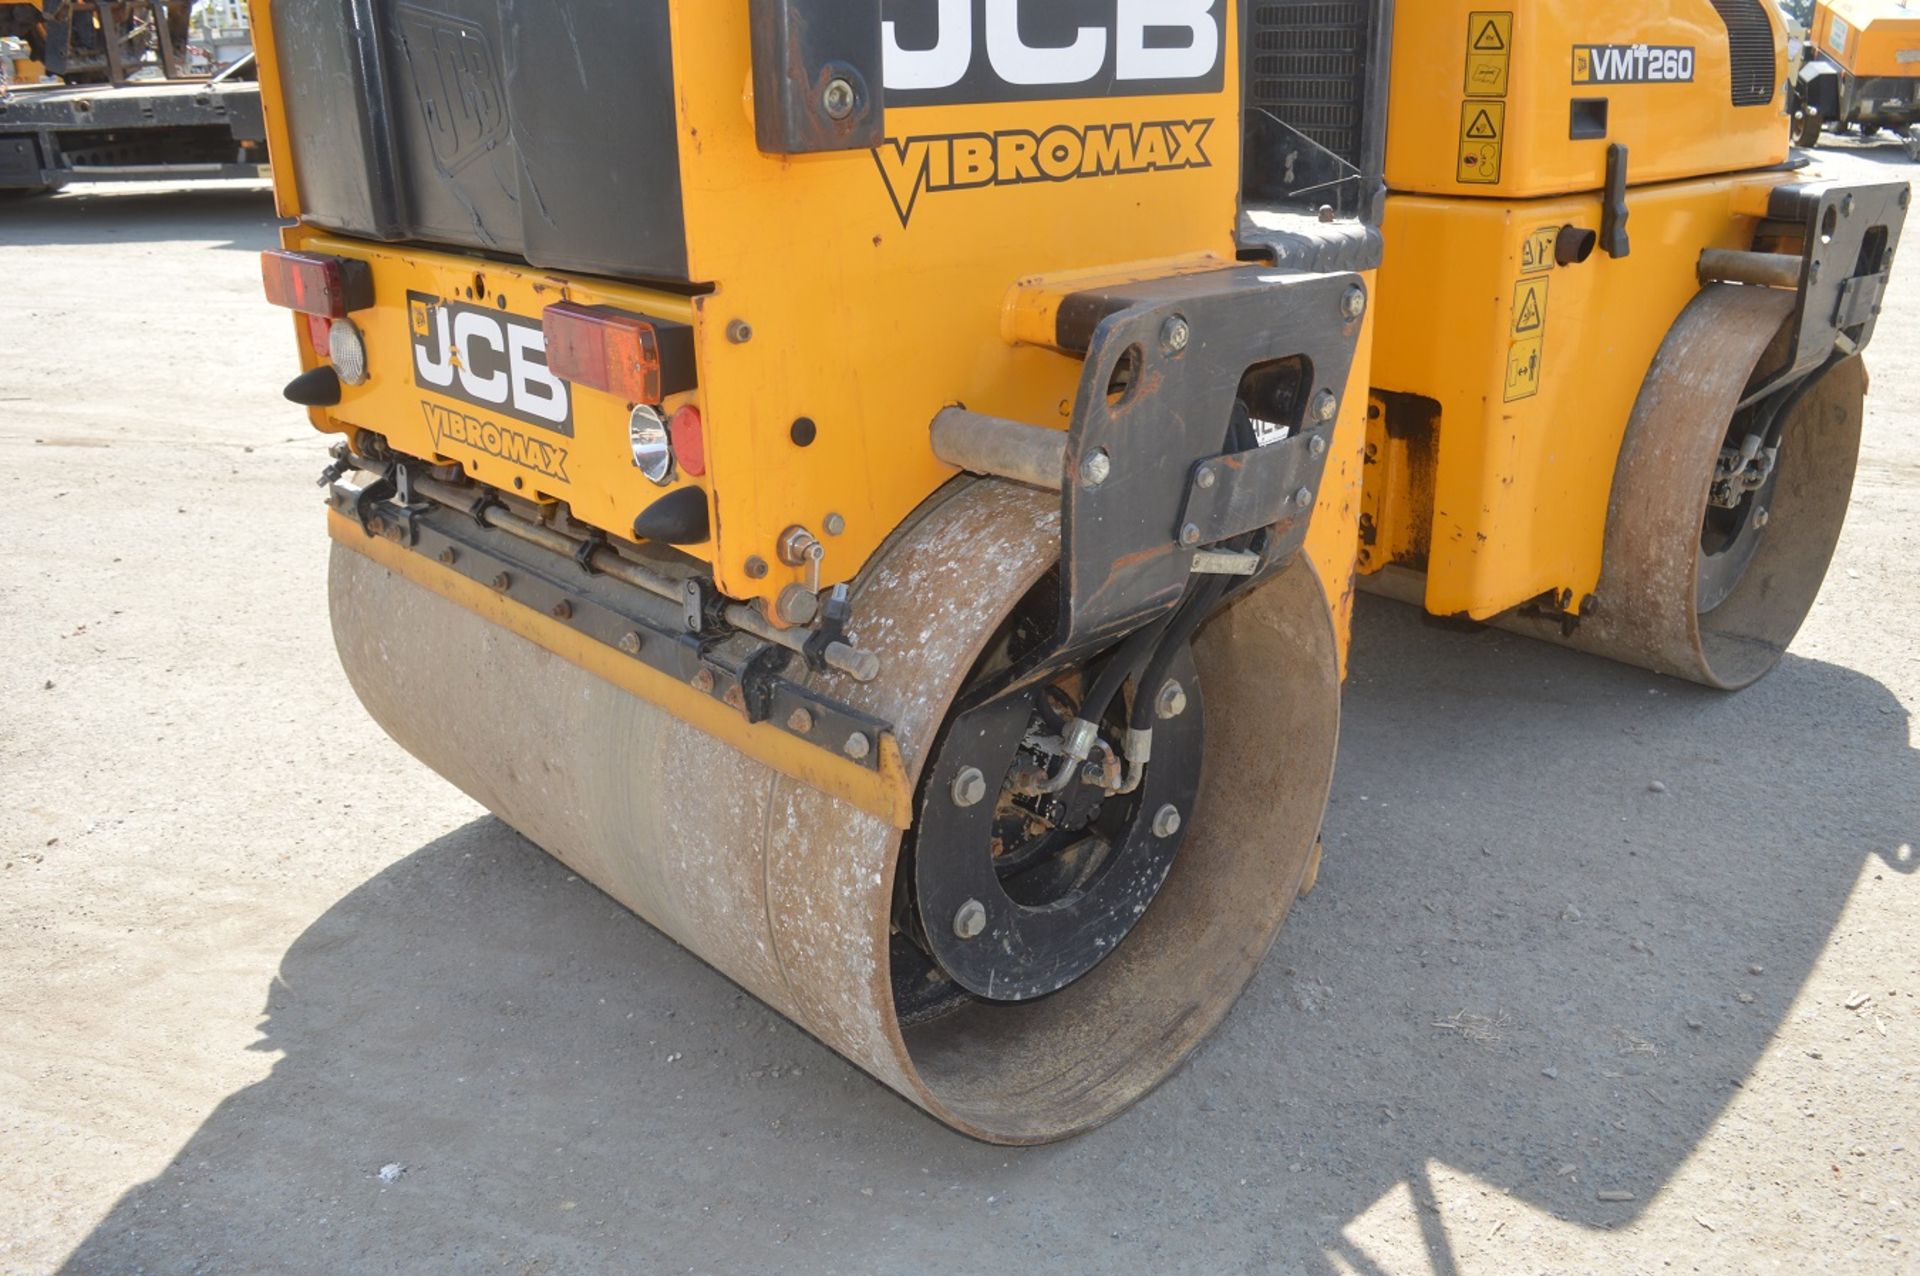 JCB VMT 260-120 double drum ride on roller Year: 2011 S/N: 2803244 Recorded Hours: A563270 - Image 10 of 16